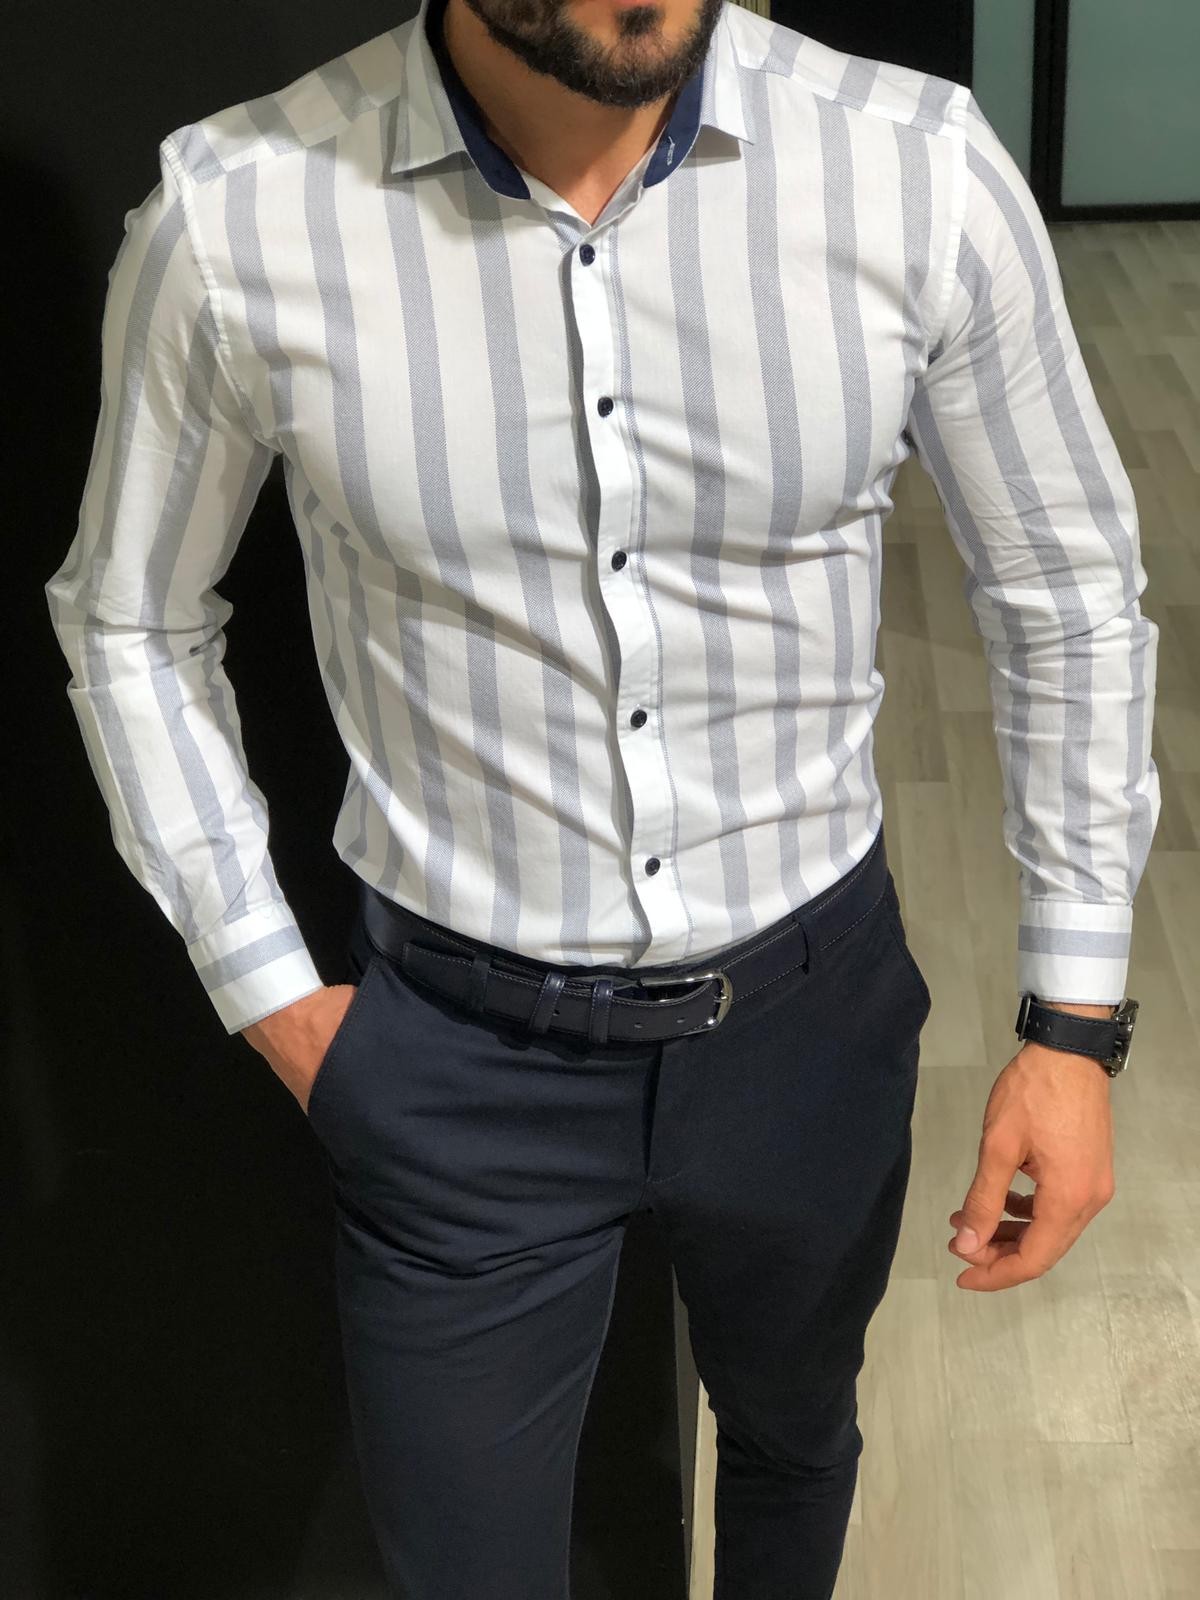 Buy White Slim Fit Striped Dress Shirt by Gentwith.com with Free Shipping